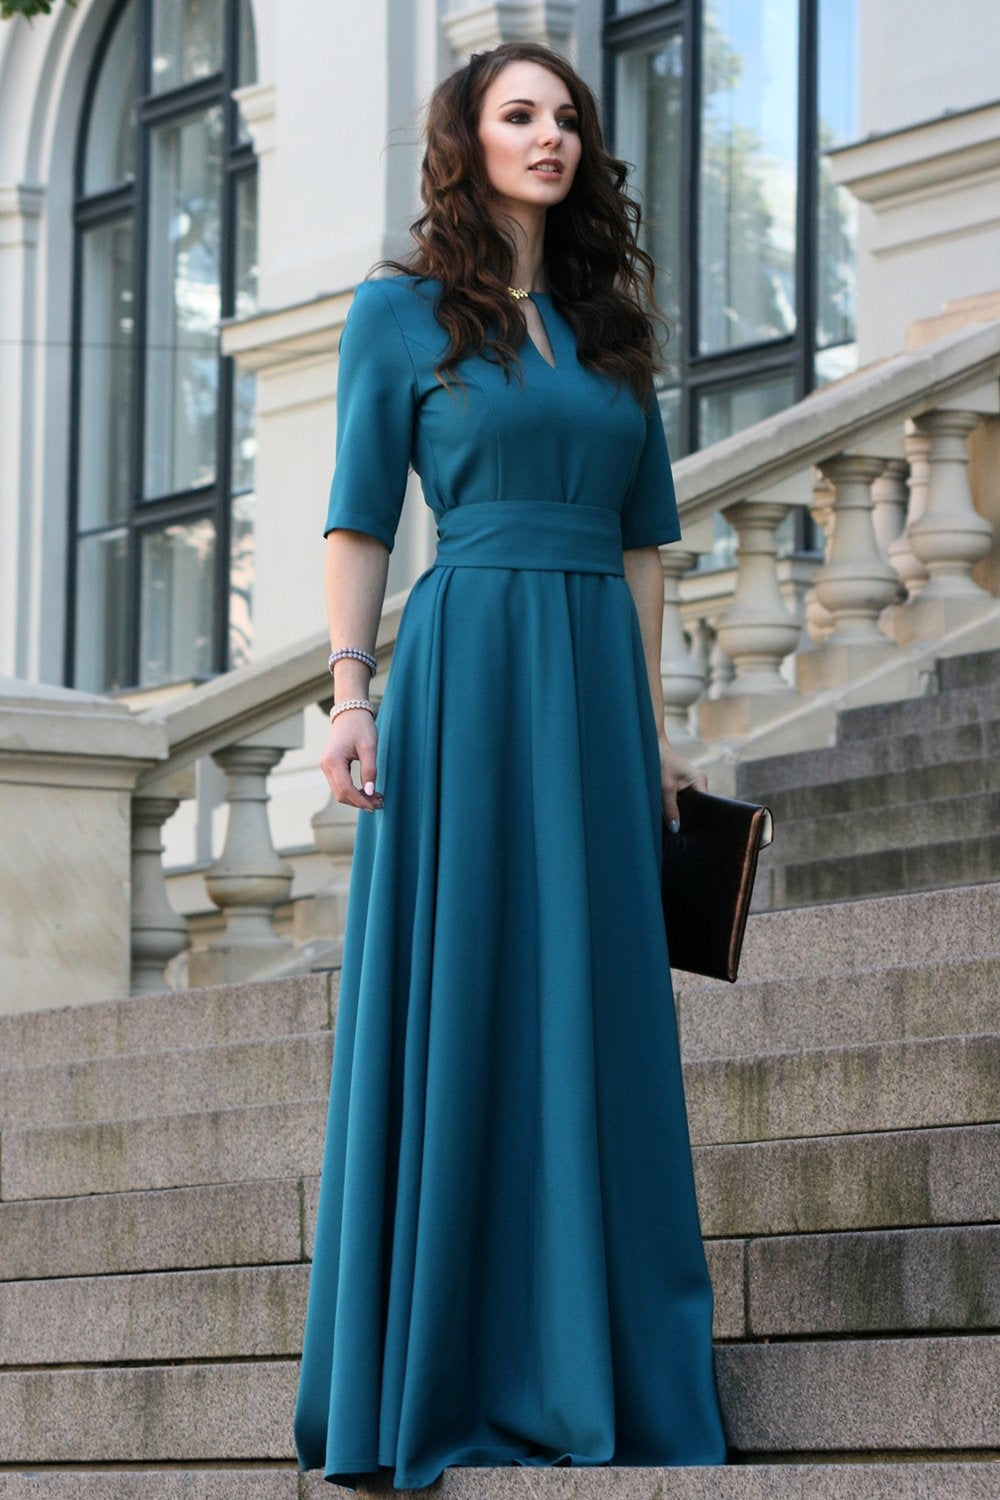 Blue green maxi dress with circle skirts. Golden color detail in neckline